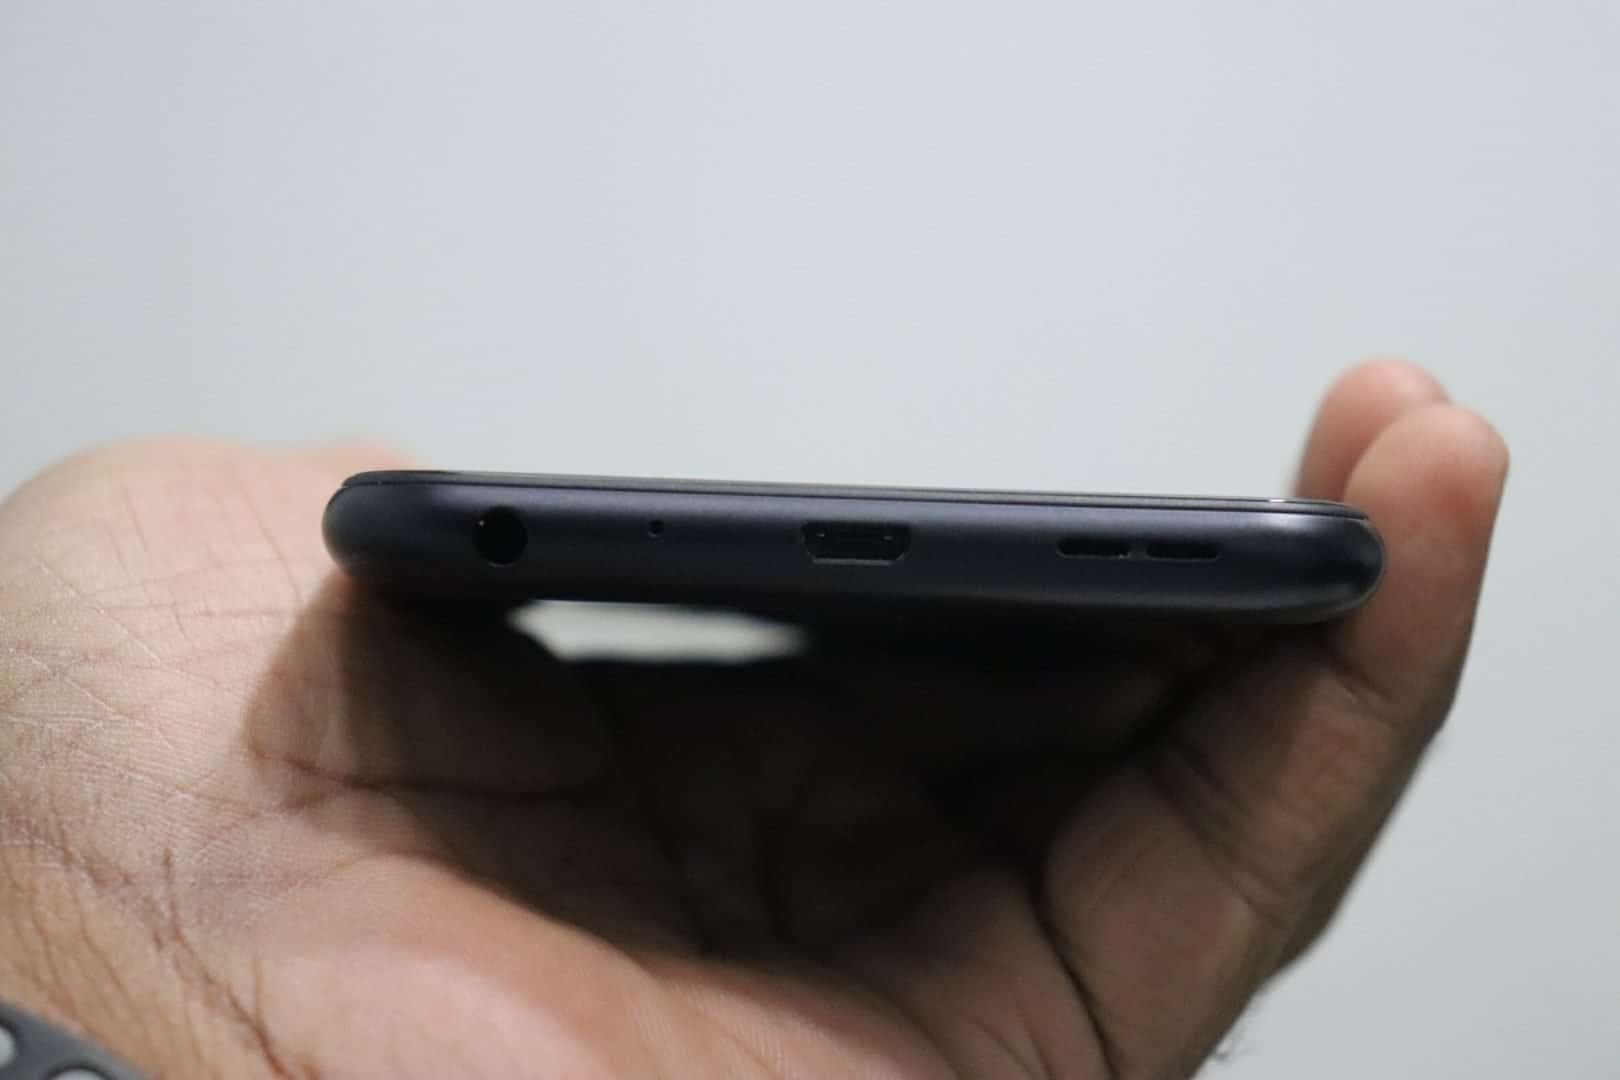 Zenfone Max Pro (M1) Hands-On Review - "Made for India" Smartphone - 8